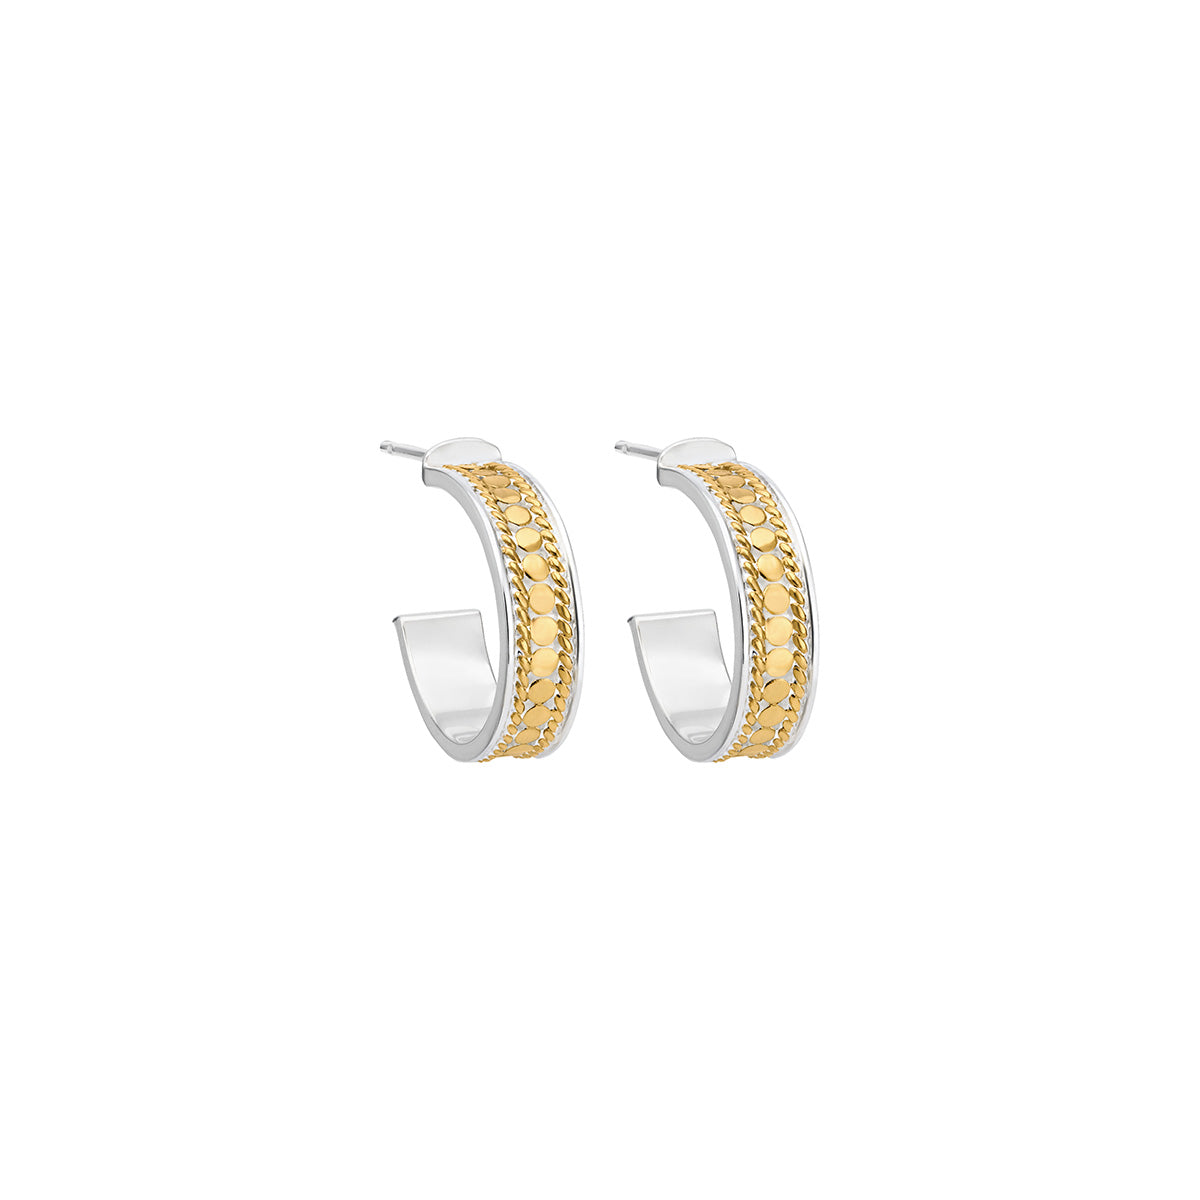 Ana Beck 18kt gold plated and sterling silver Hoop Post Earring - Gold